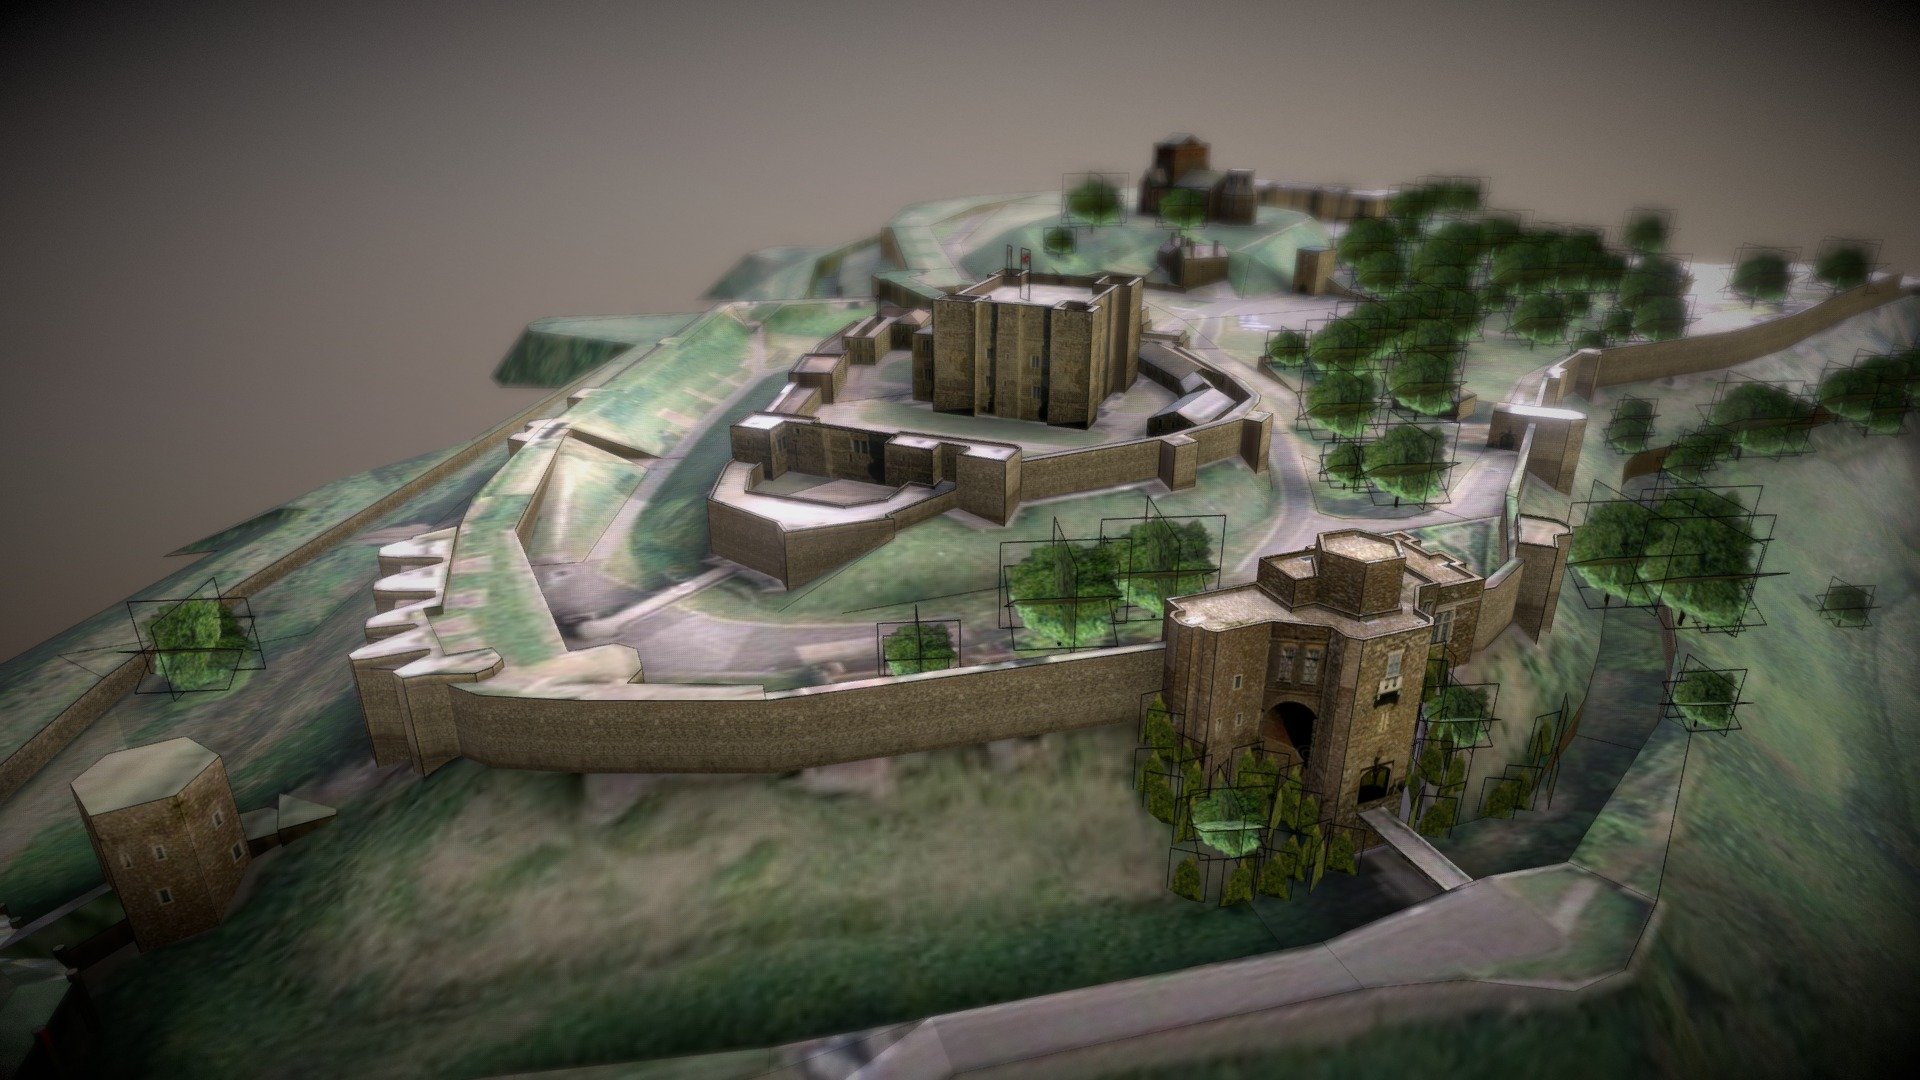 Model made by baco yohano and shared on sketchup warehouse:

https://3dwarehouse.sketchup.com/user/0553123819038560175902261/baco-yahanno?nav=models - Dover Castle - 3D model by McFry 3d model